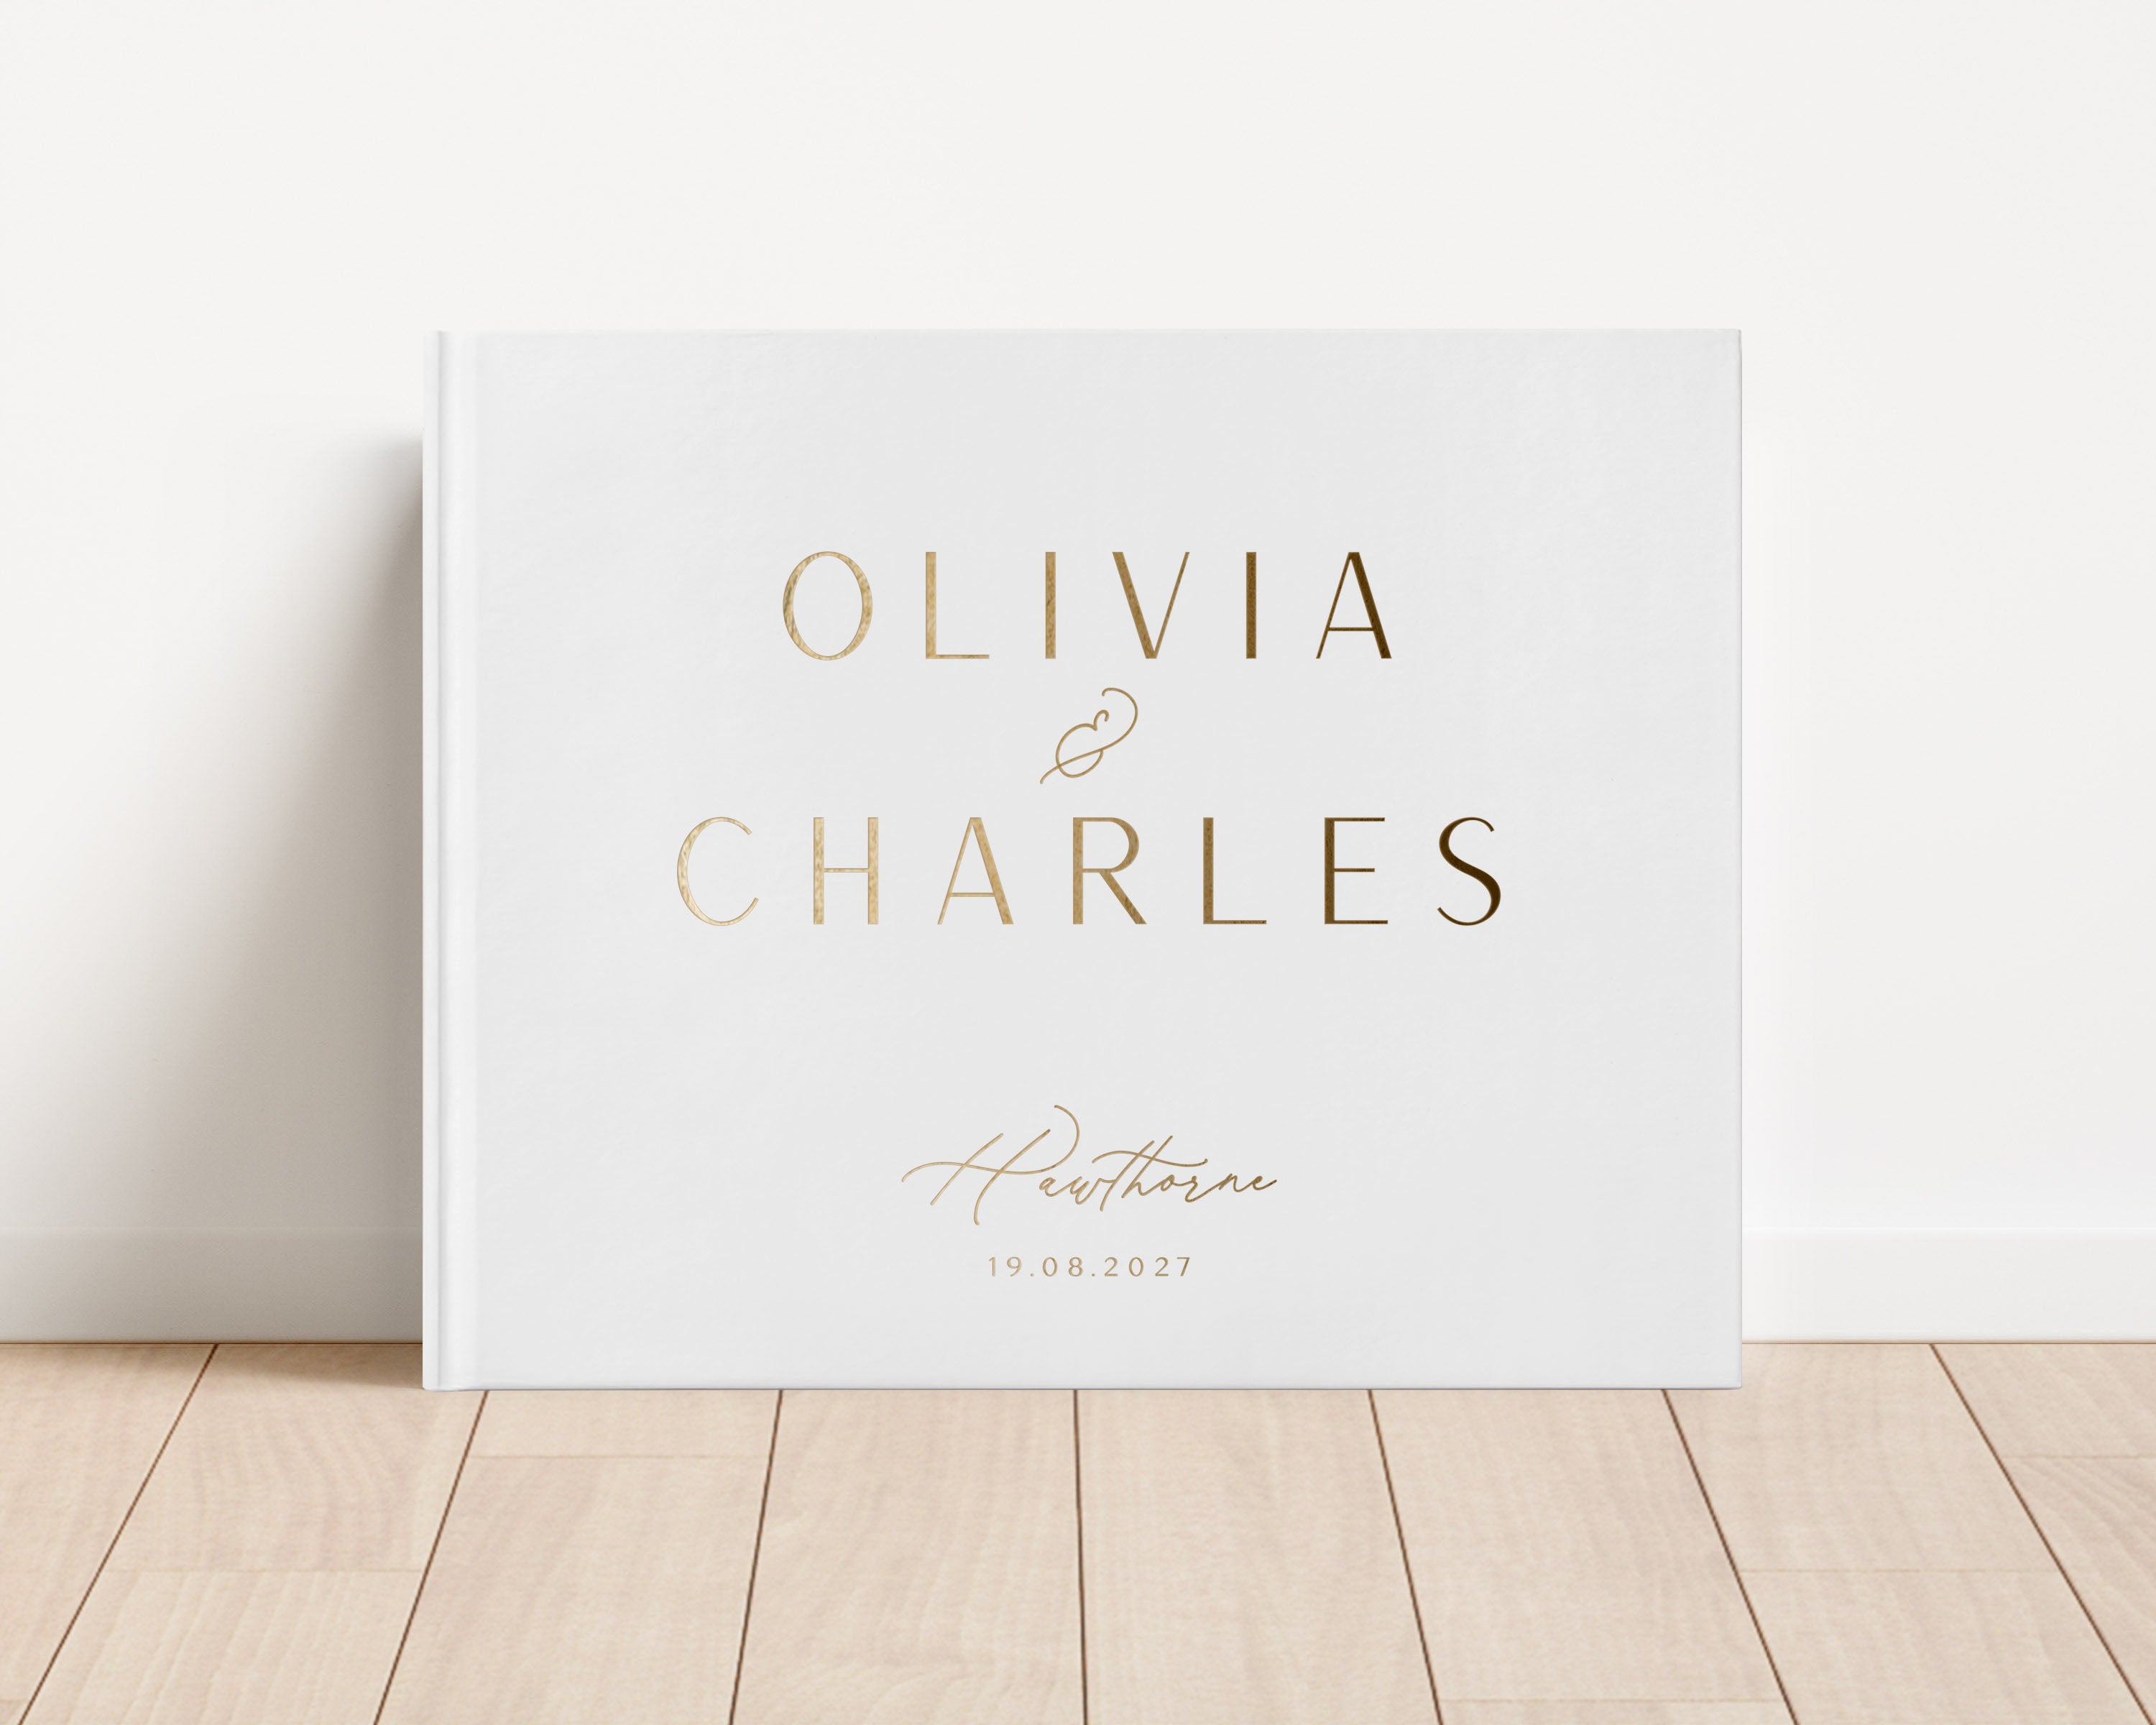 Luxury wedding guest book with custom gold foil text and white hardback cover.